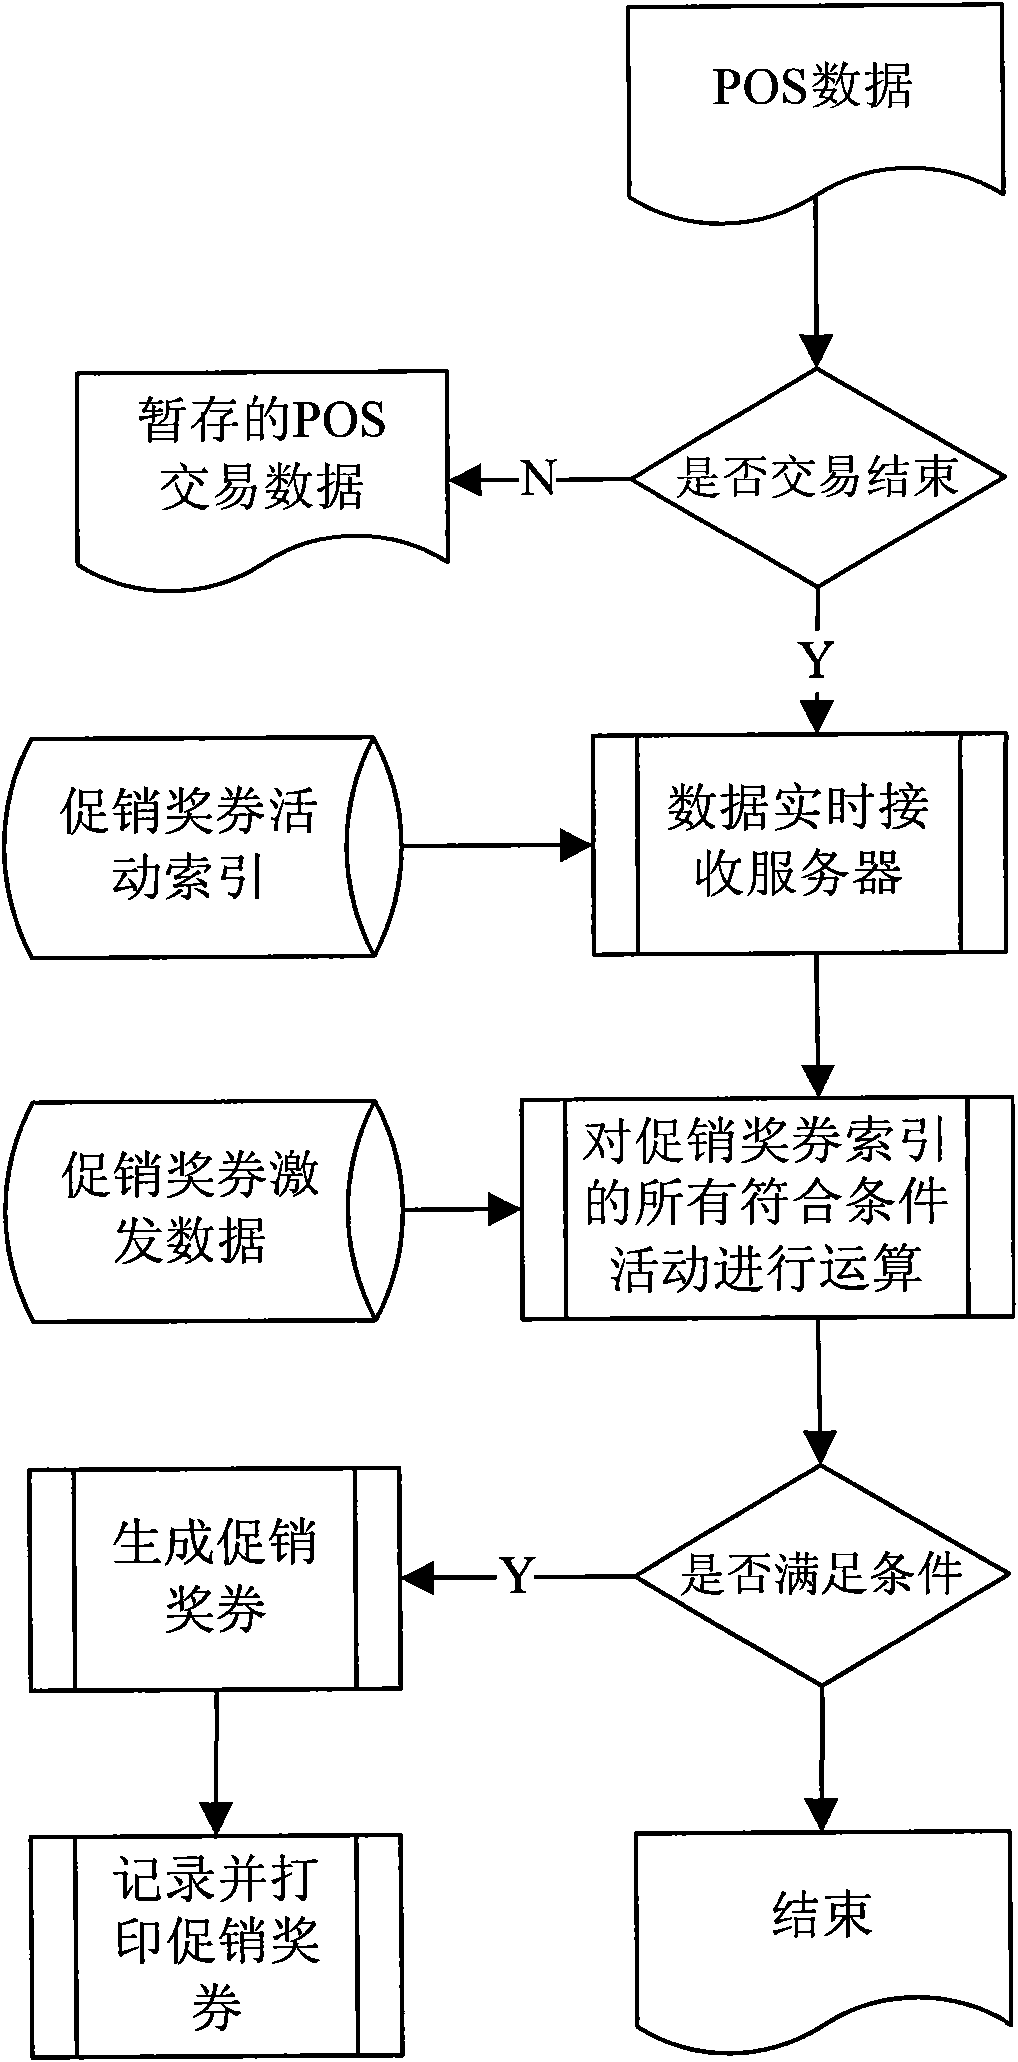 Electronic consumption system for generating and exchanging sales promotion lotteries and method